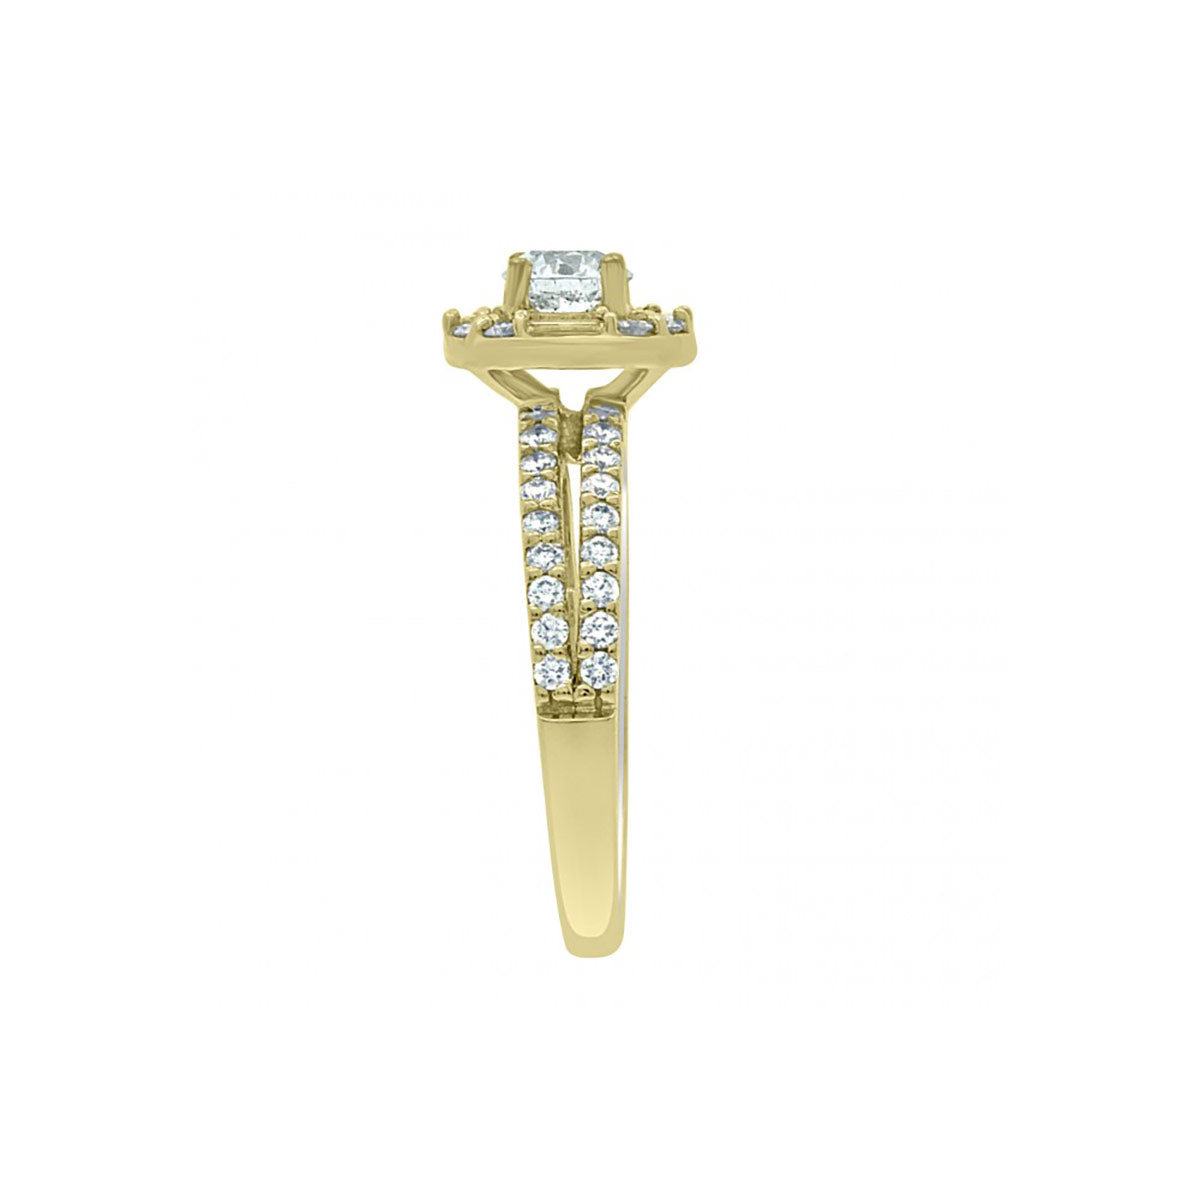 Baguette and Round Diamond Engagement Ring in yellow gold pictured from the side